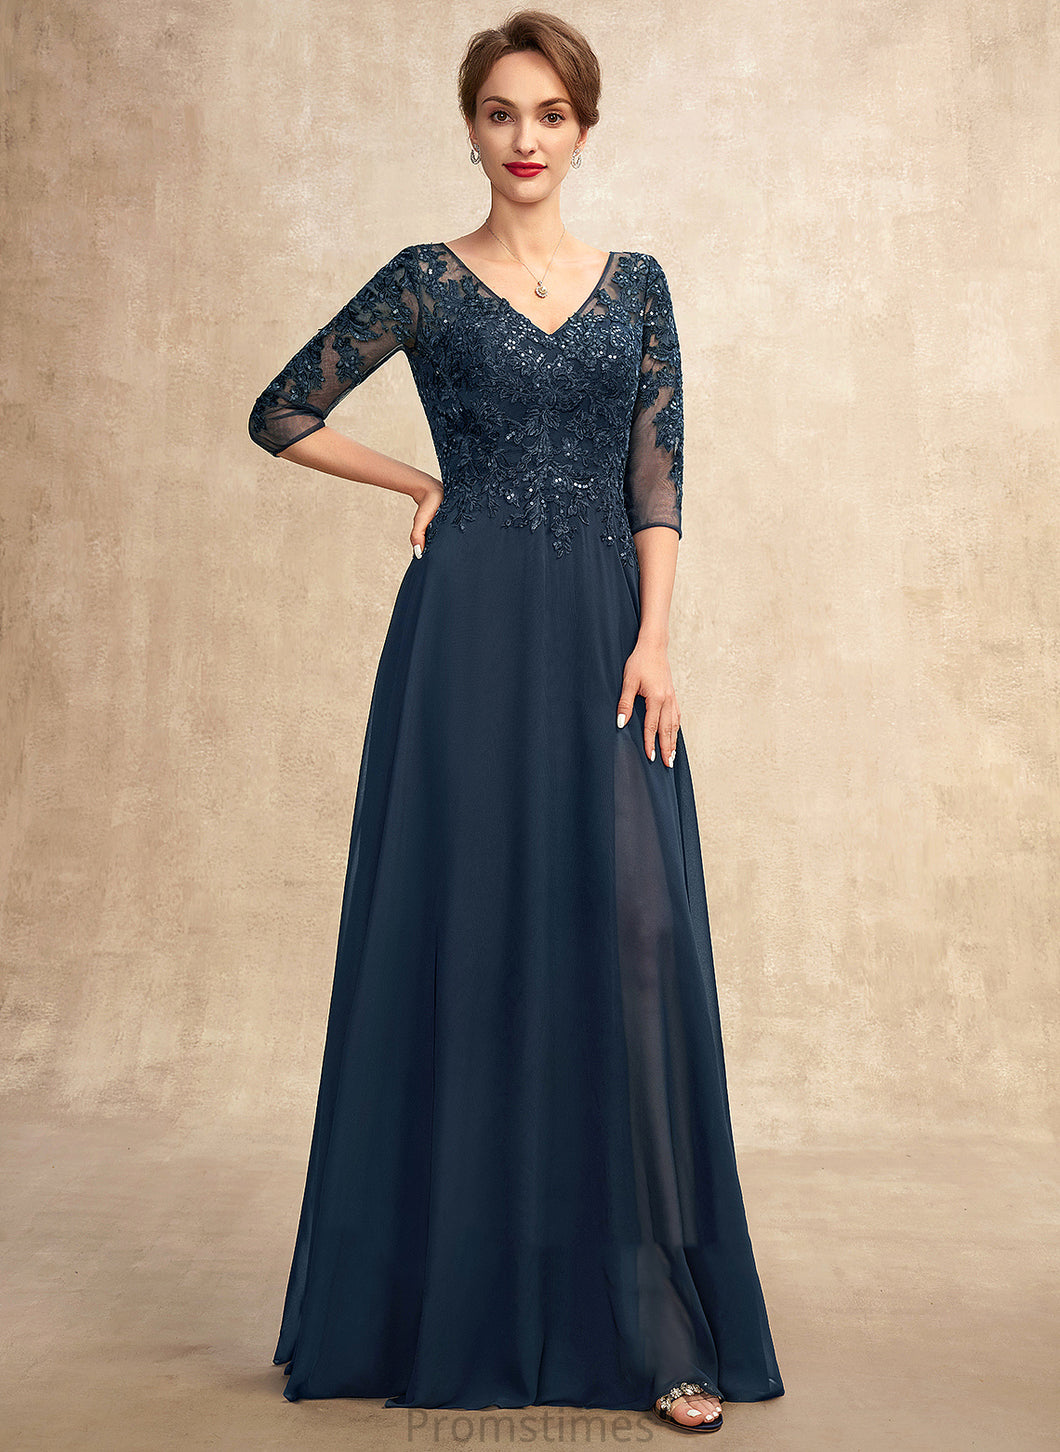 the A-Line Chiffon of Floor-Length Daisy Mother of the Bride Dresses Bride Front Mother Lace Dress Split Sequins V-neck With